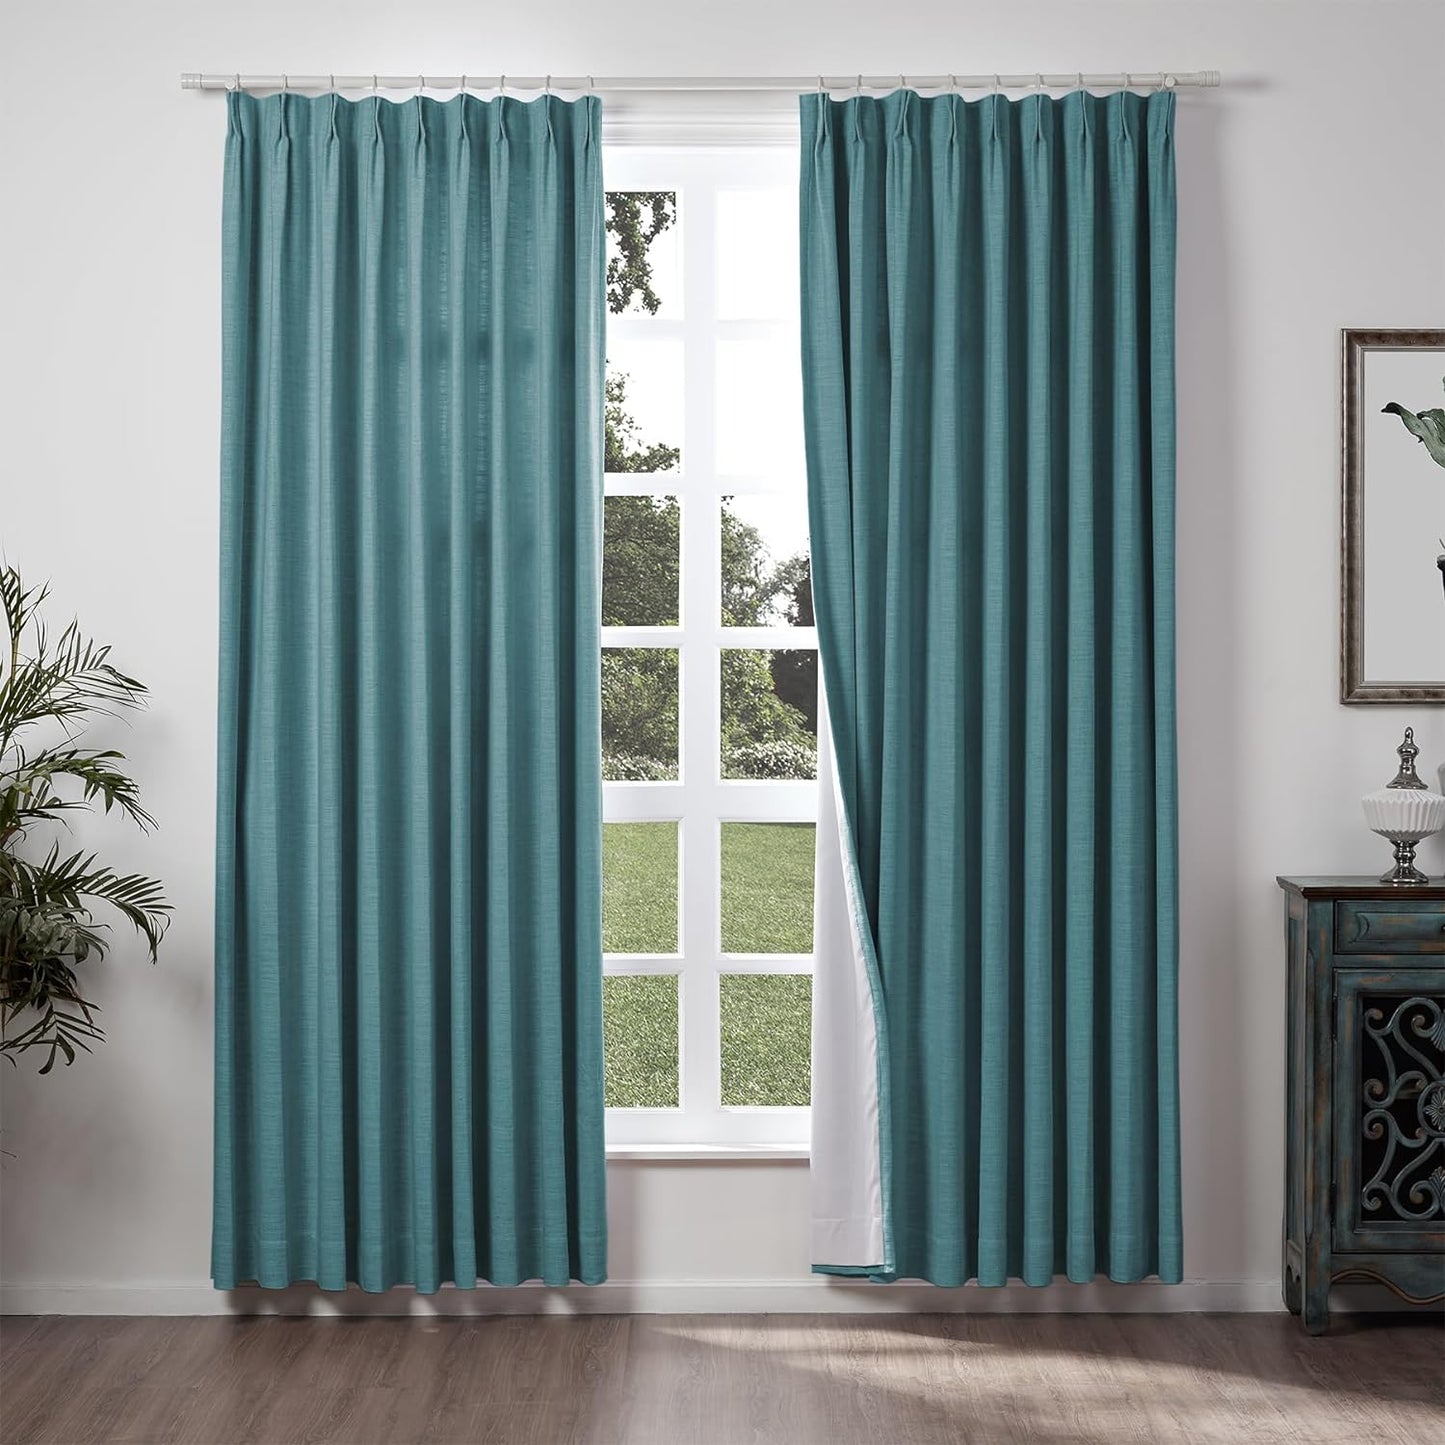 Chadmade 50" W X 63" L Polyester Linen Drape with Blackout Lining Pinch Pleat Curtain for Sliding Door Patio Door Living Room Bedroom, (1 Panel) Sand Beige Tallis Collection  ChadMade Everglade Teal (34) 120Wx96L 